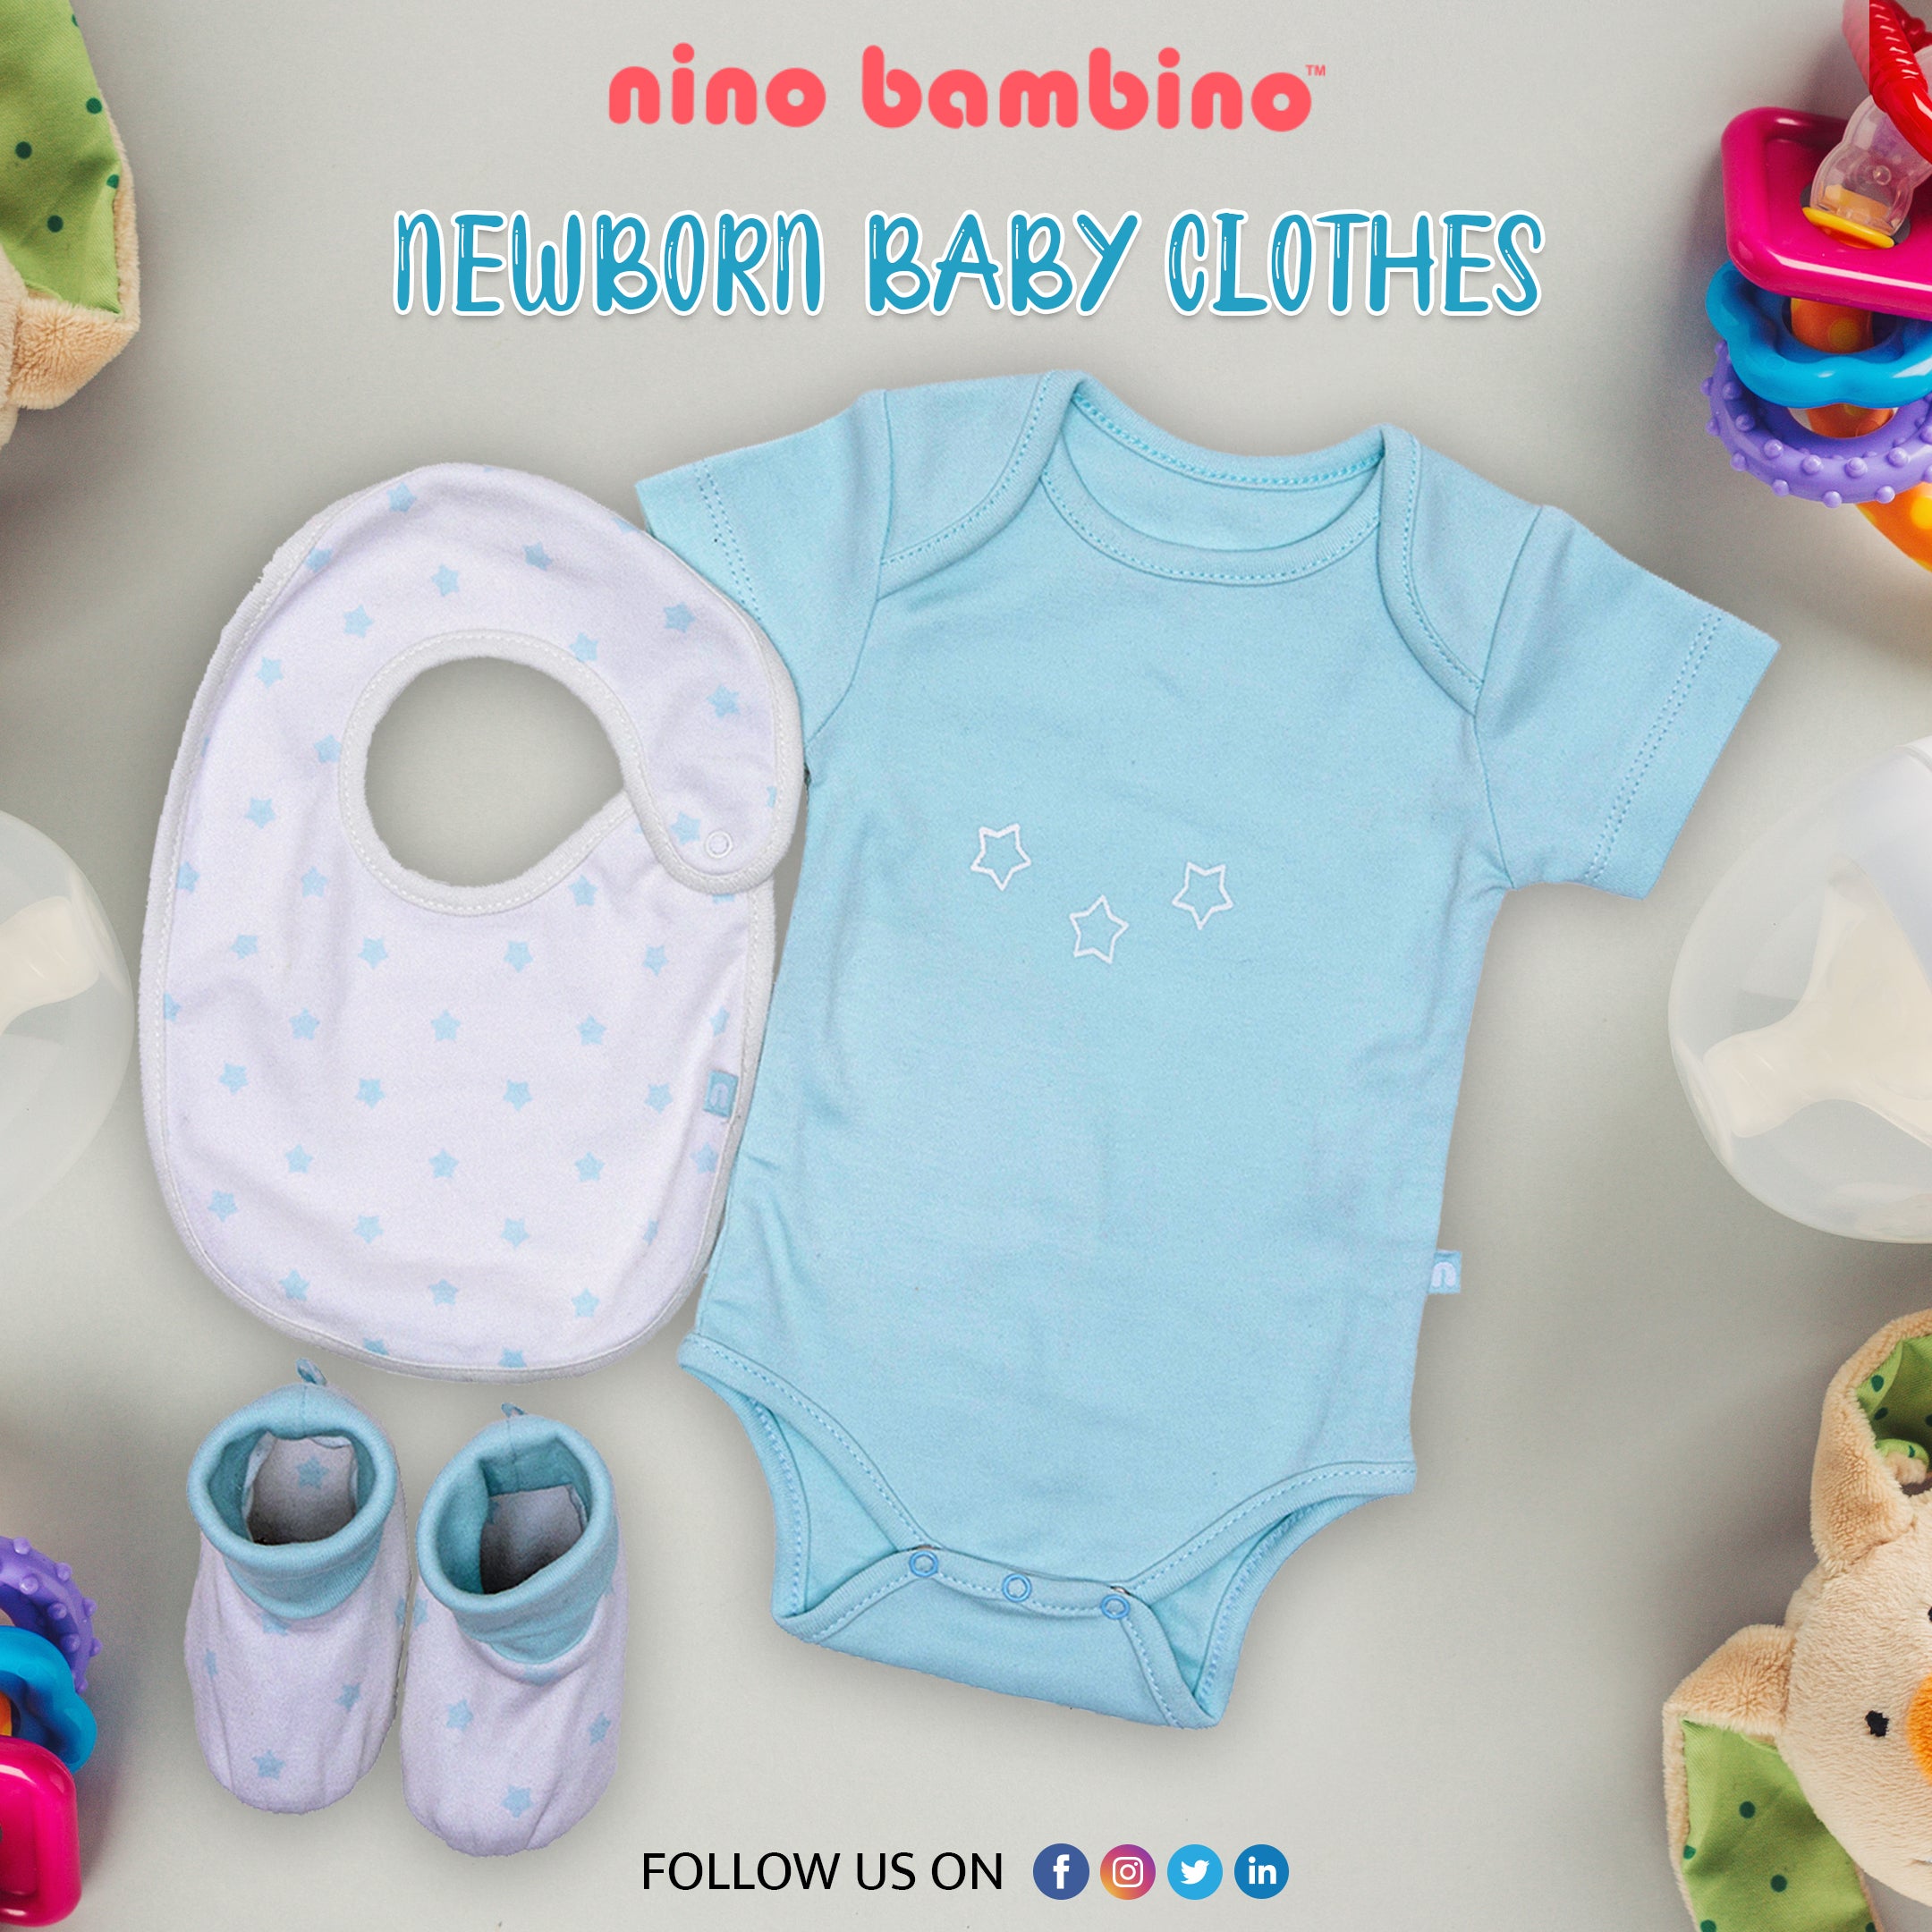 Tips to Newborn Baby Clothes For New Parents